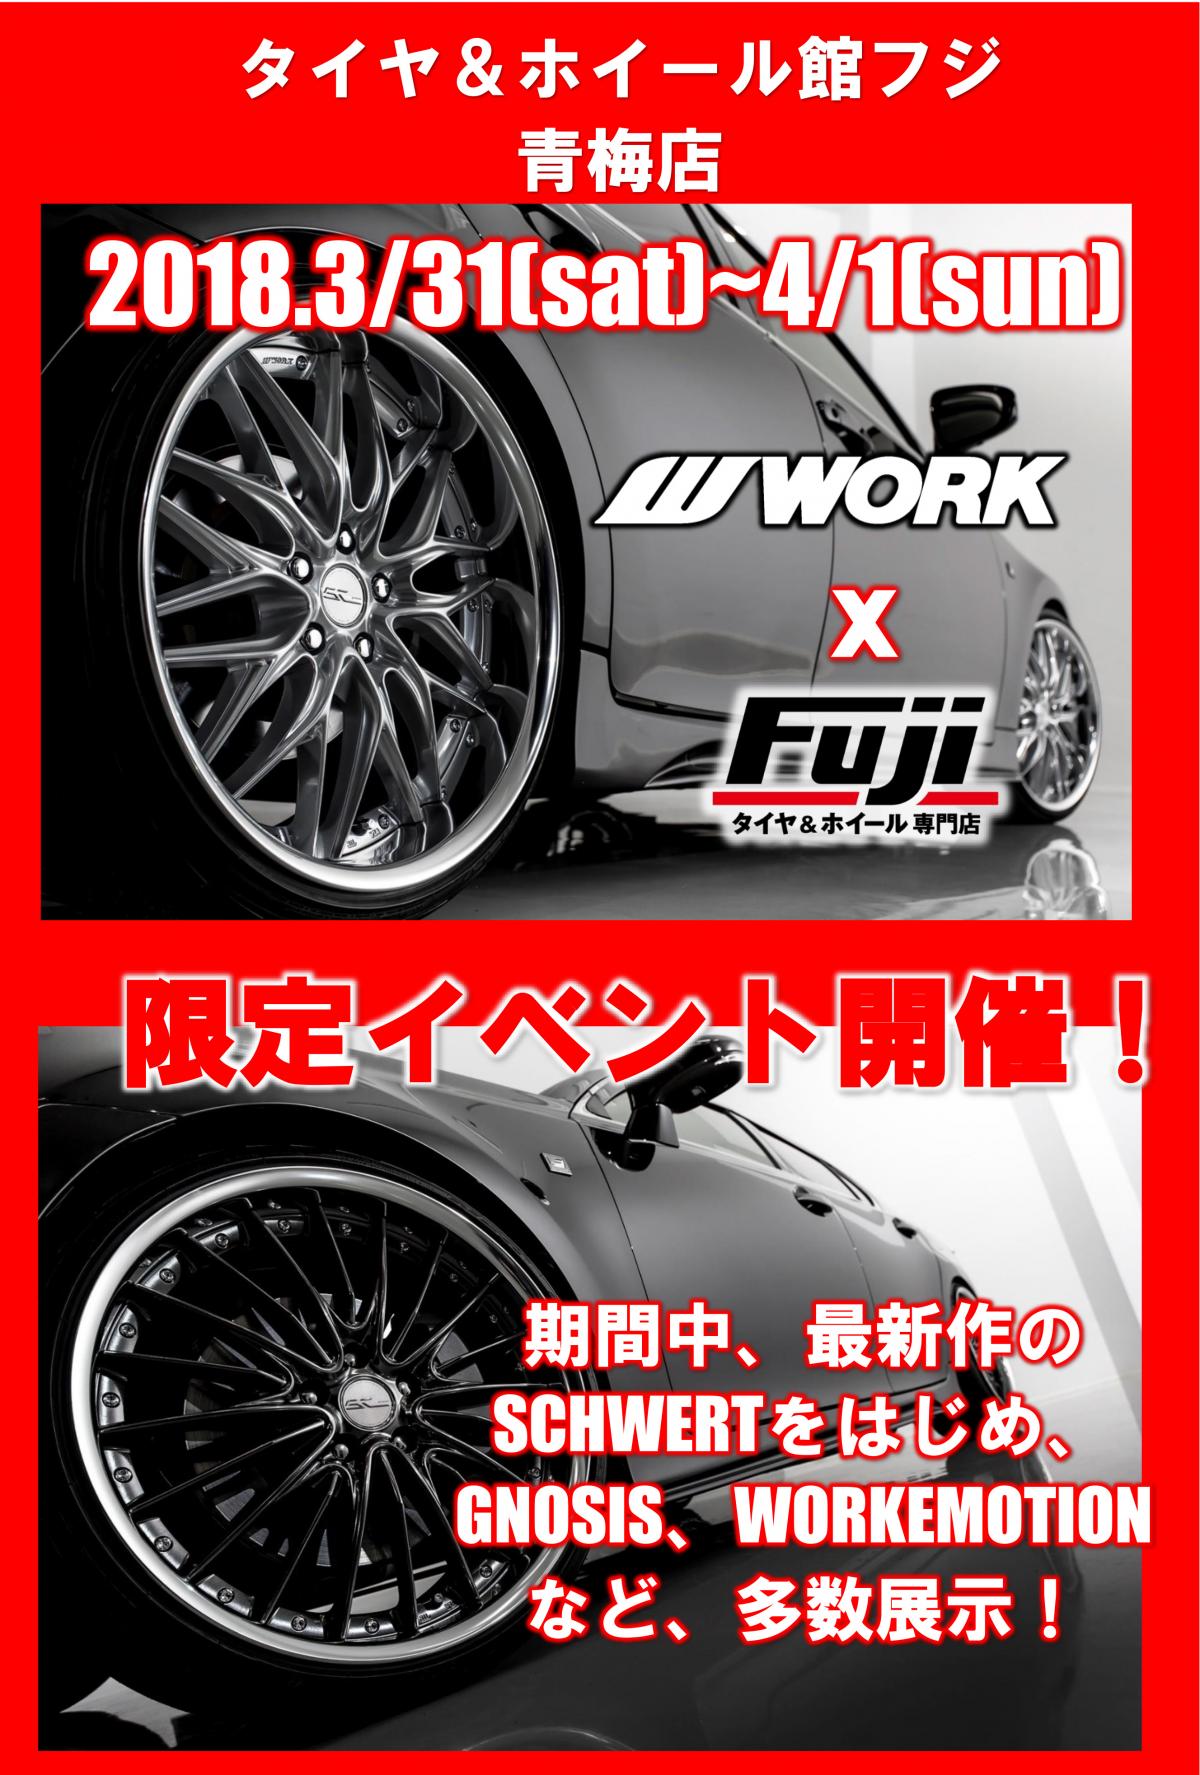 Tire & Wheel House Fuji Ome Store Limited Event